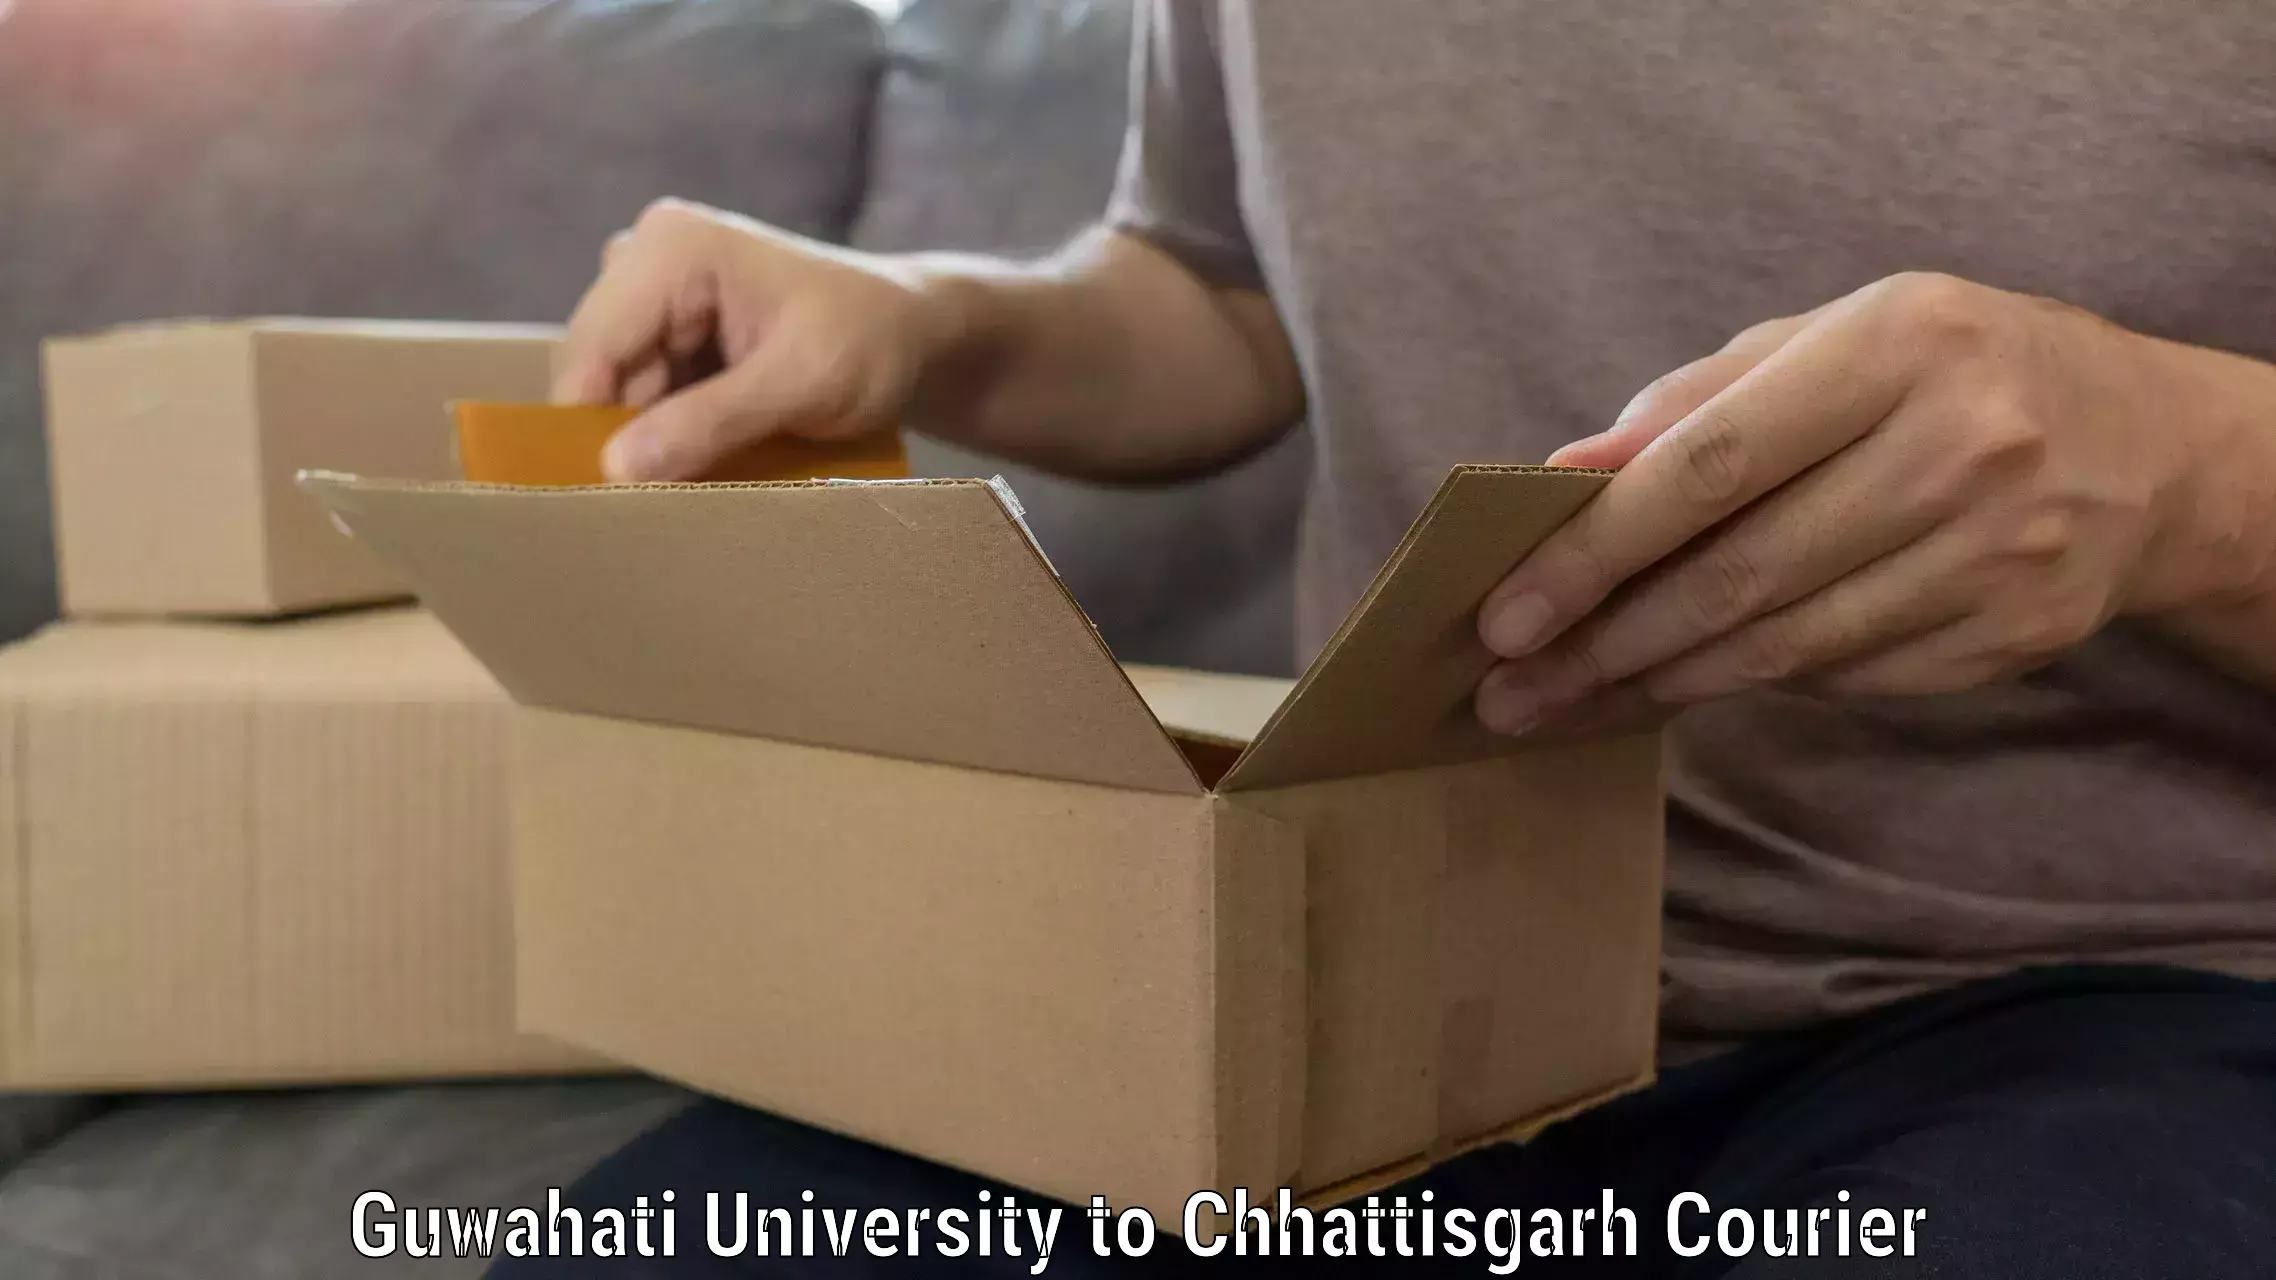 Efficient relocation services in Guwahati University to Ramanujganj